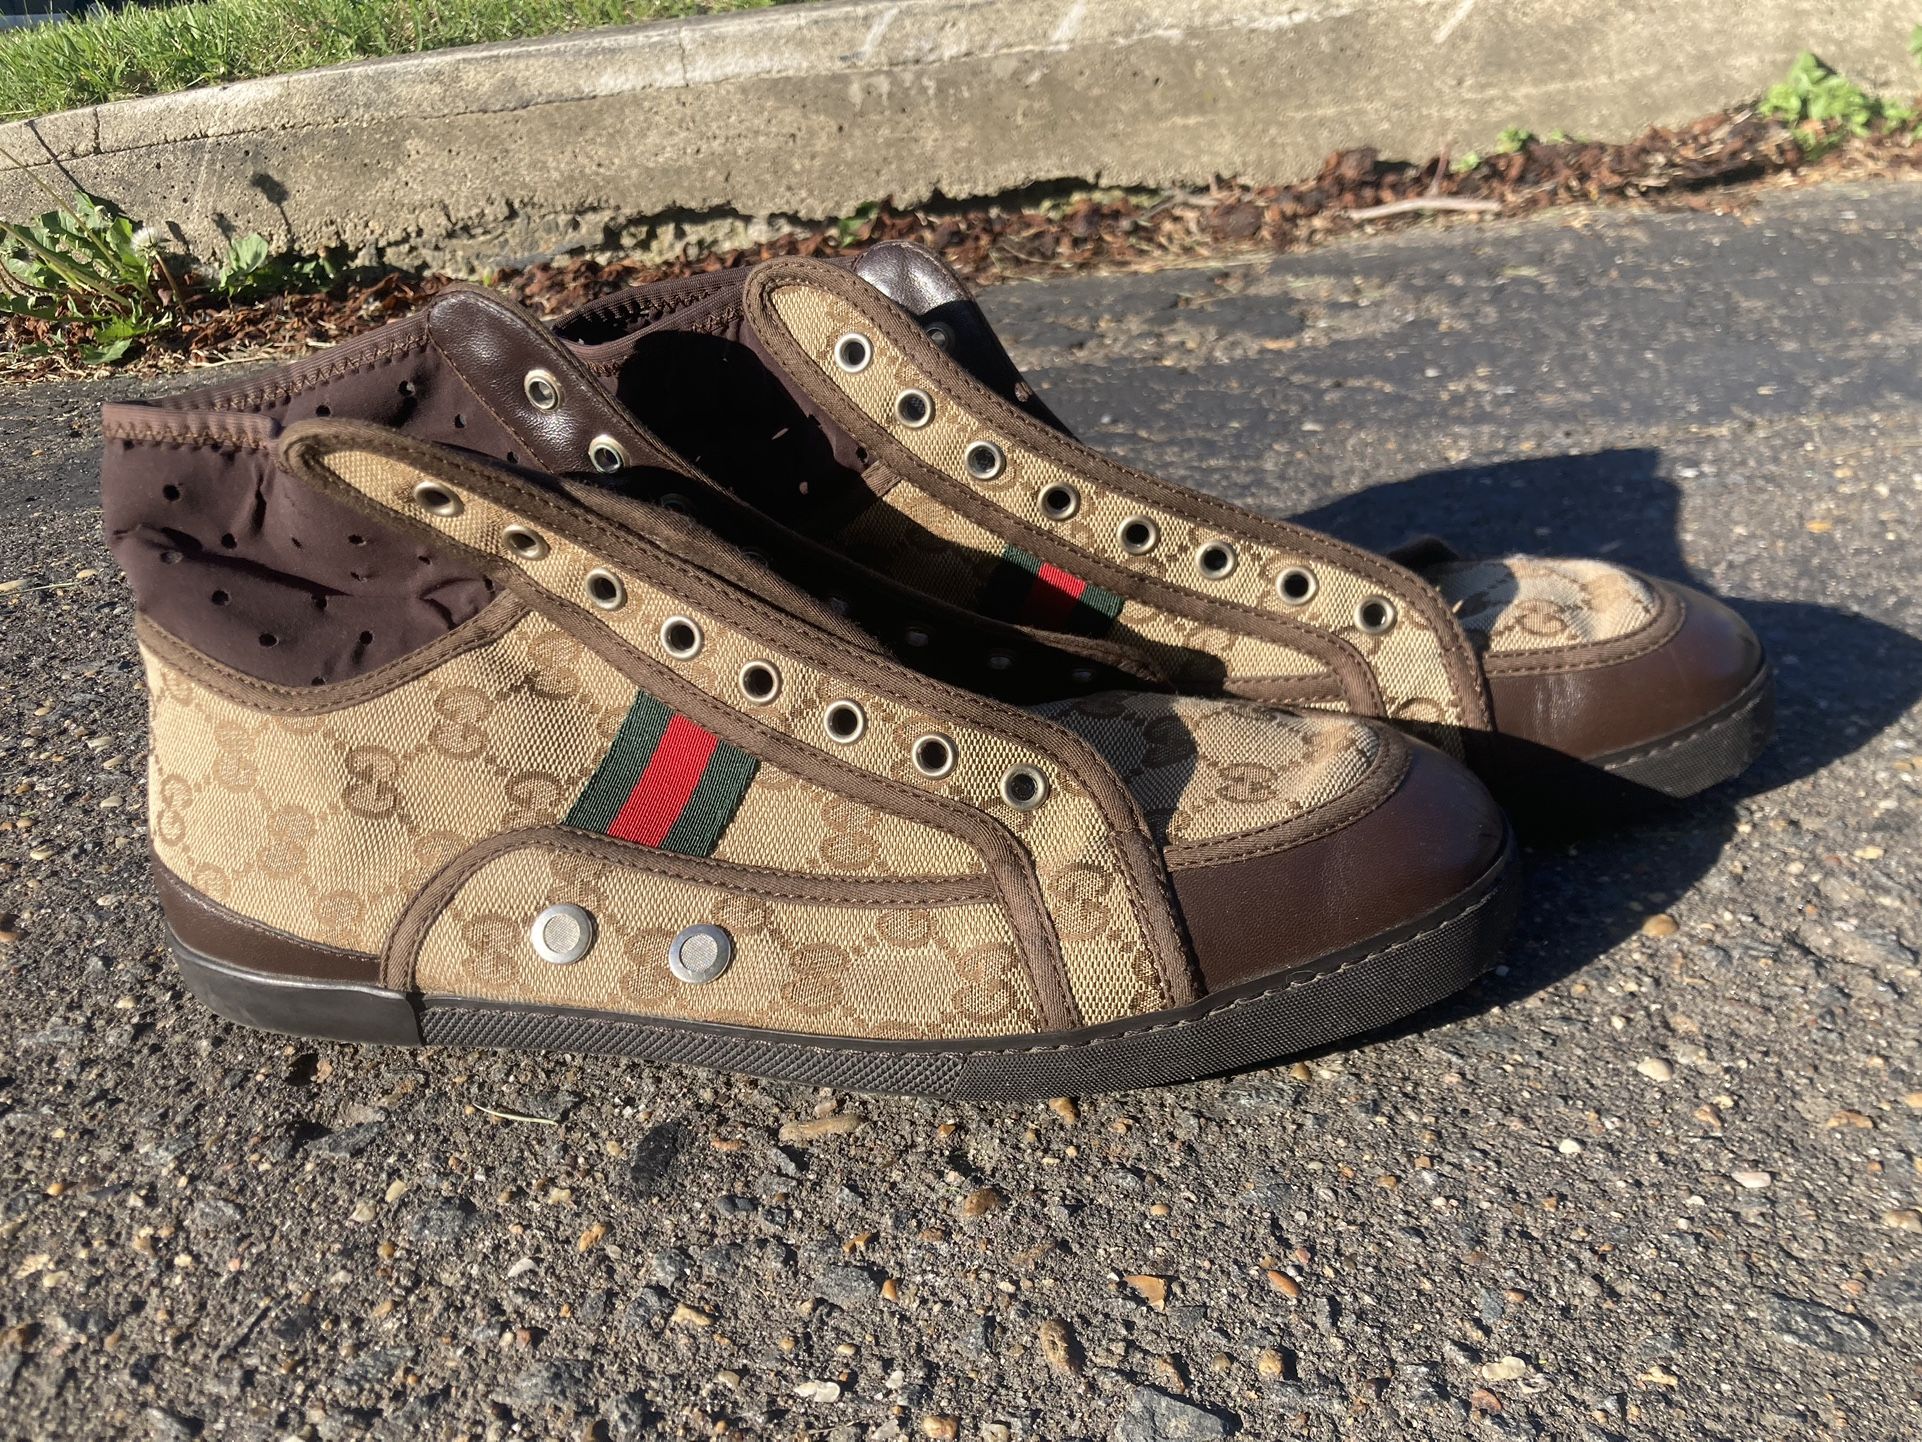 Real Gucci Sneakers For Sale.